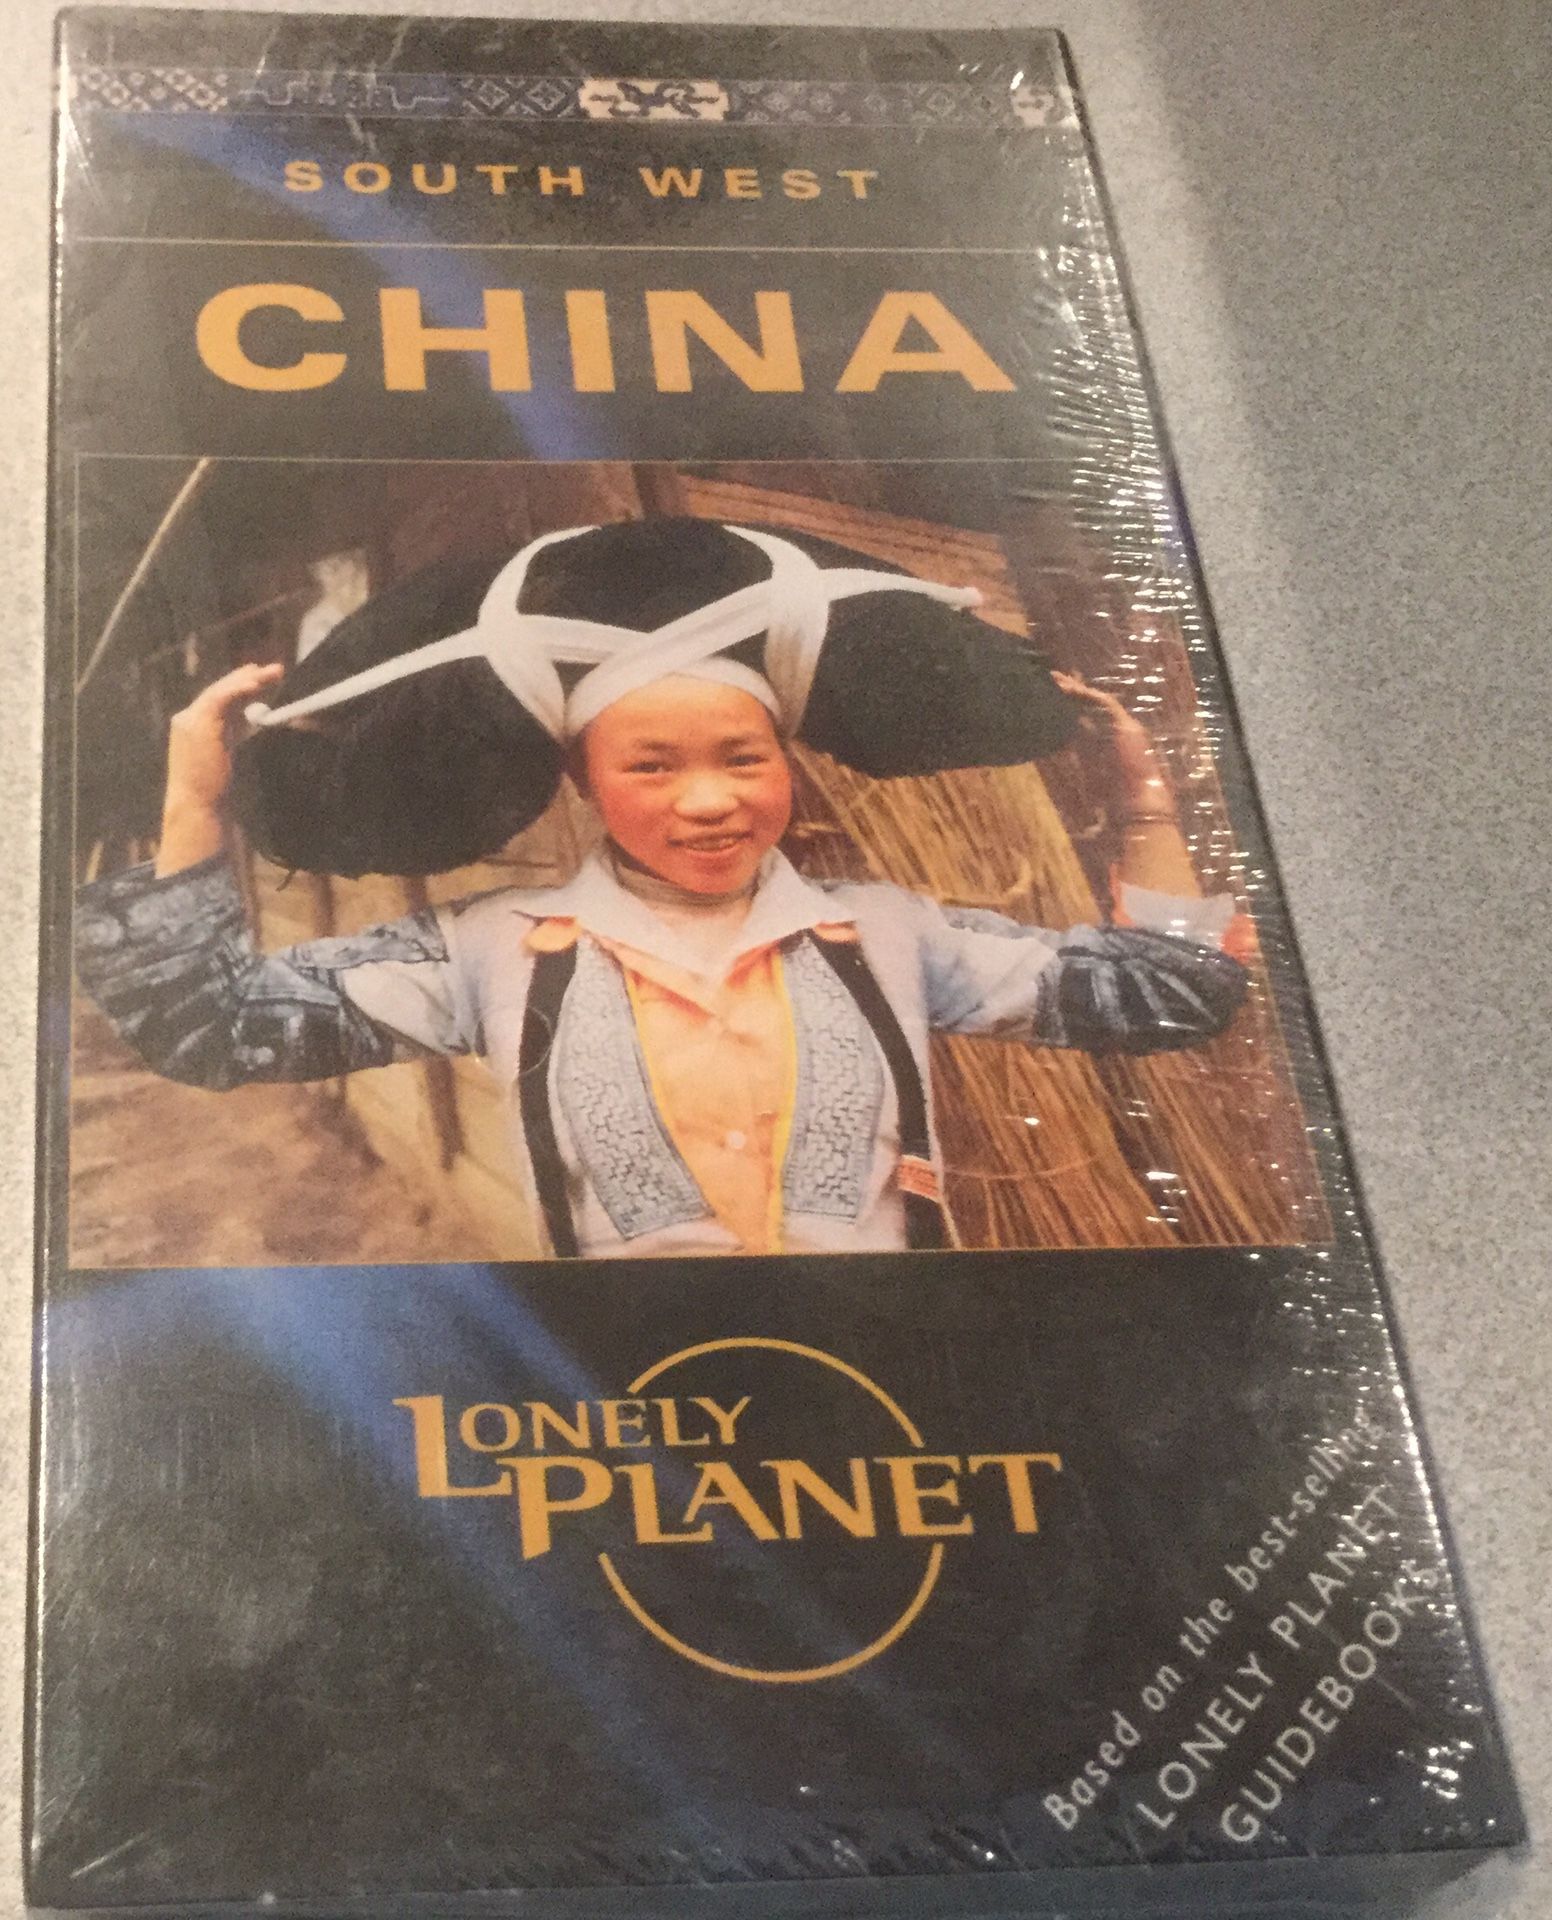 South West China Movie VHS TAPE Still In Origanal Plastic Rap